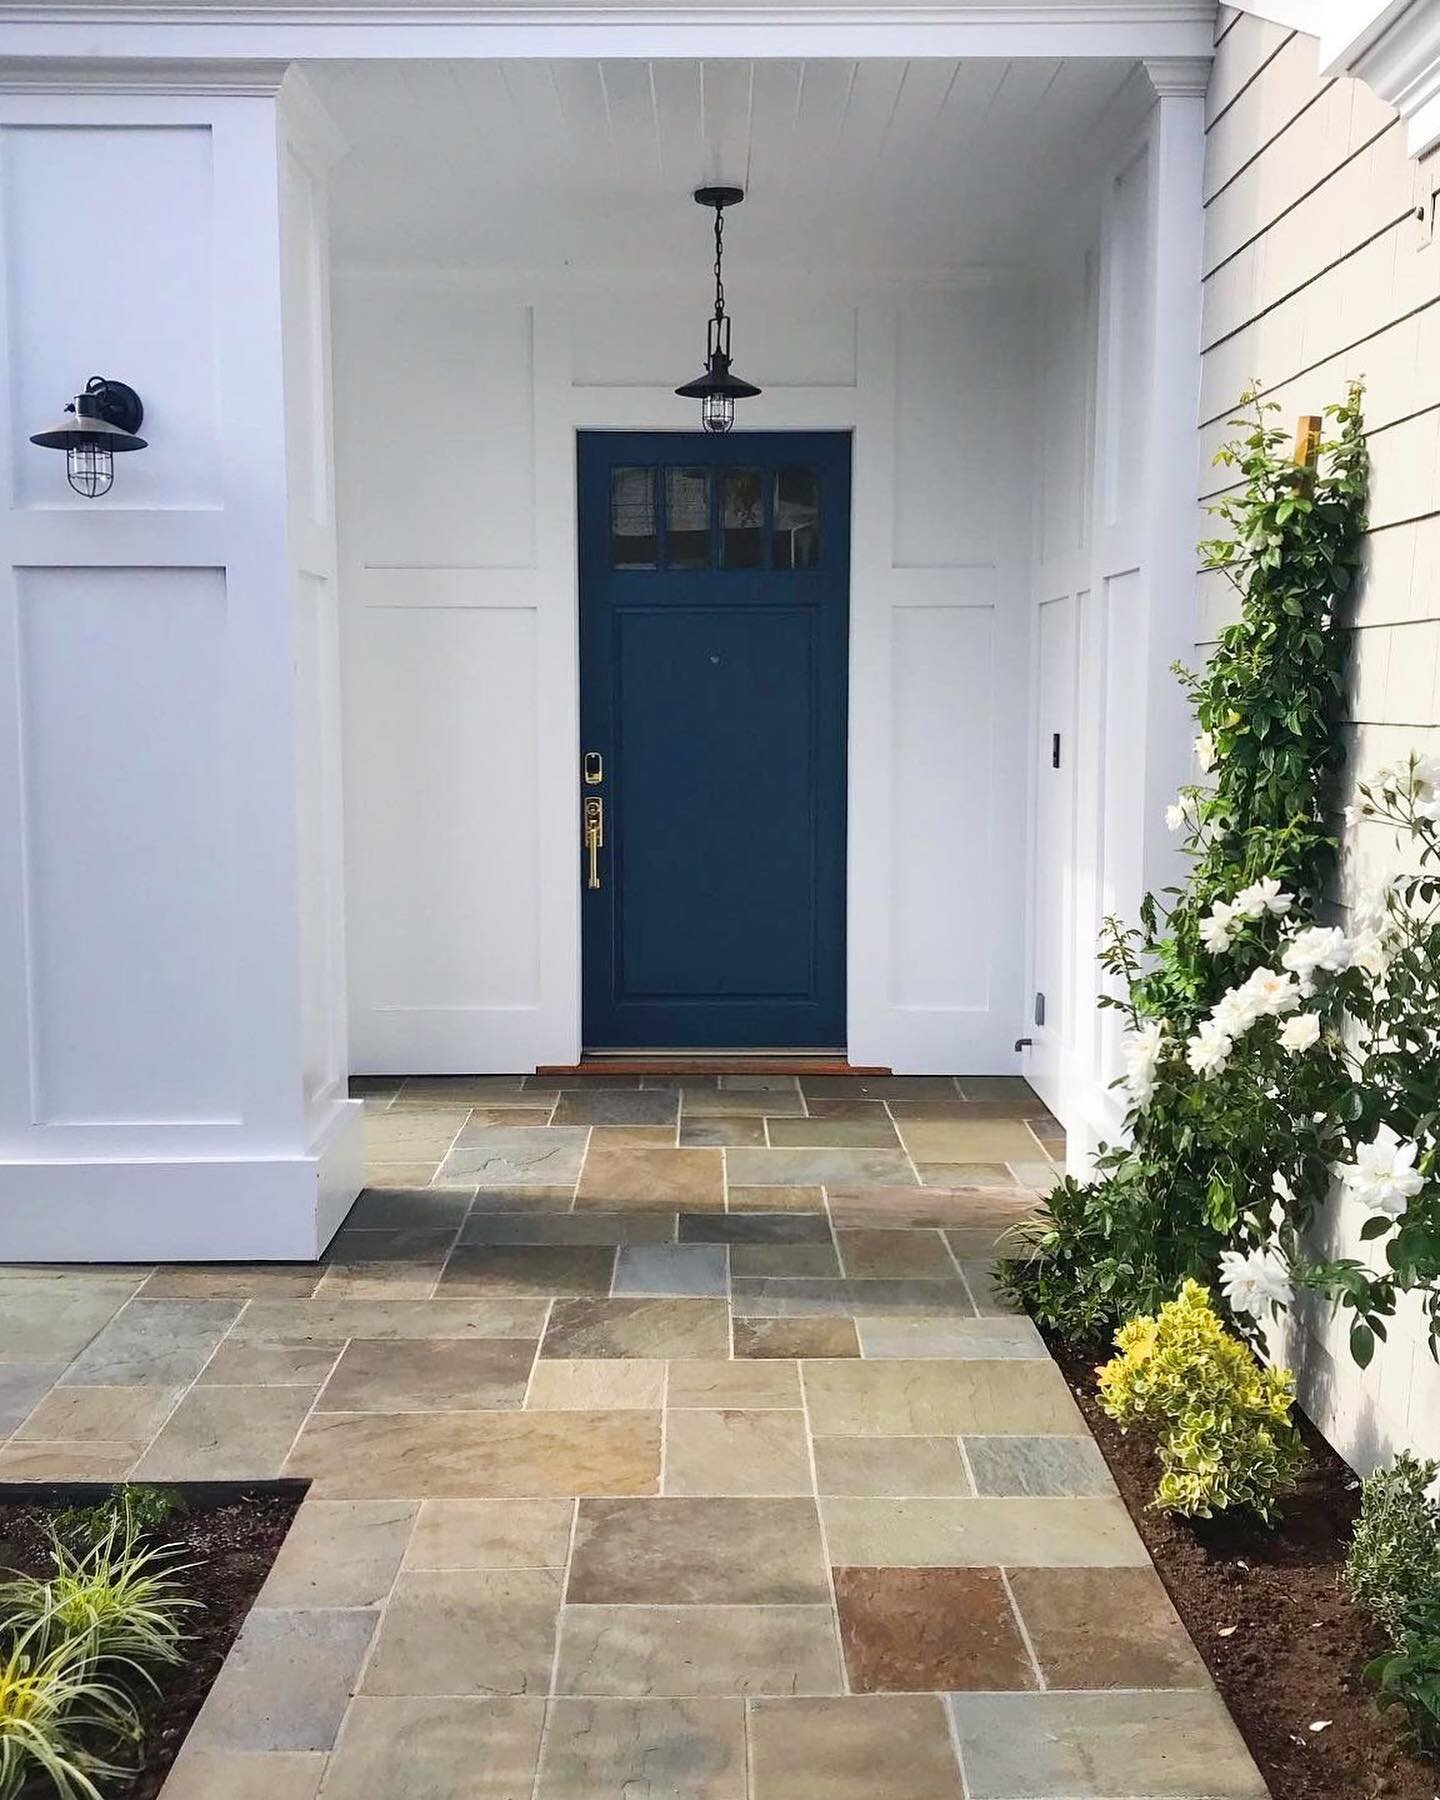 2/1/21 — They say when one door closes, another one opens... ⁣
⁣
So we hope this month provides you with a pathway to new inspiration just like this home’s new & improved front entrance! ✨⁣
⁣
Design & Installation: @botanicalandscape ⁣
Masonry: @gemi